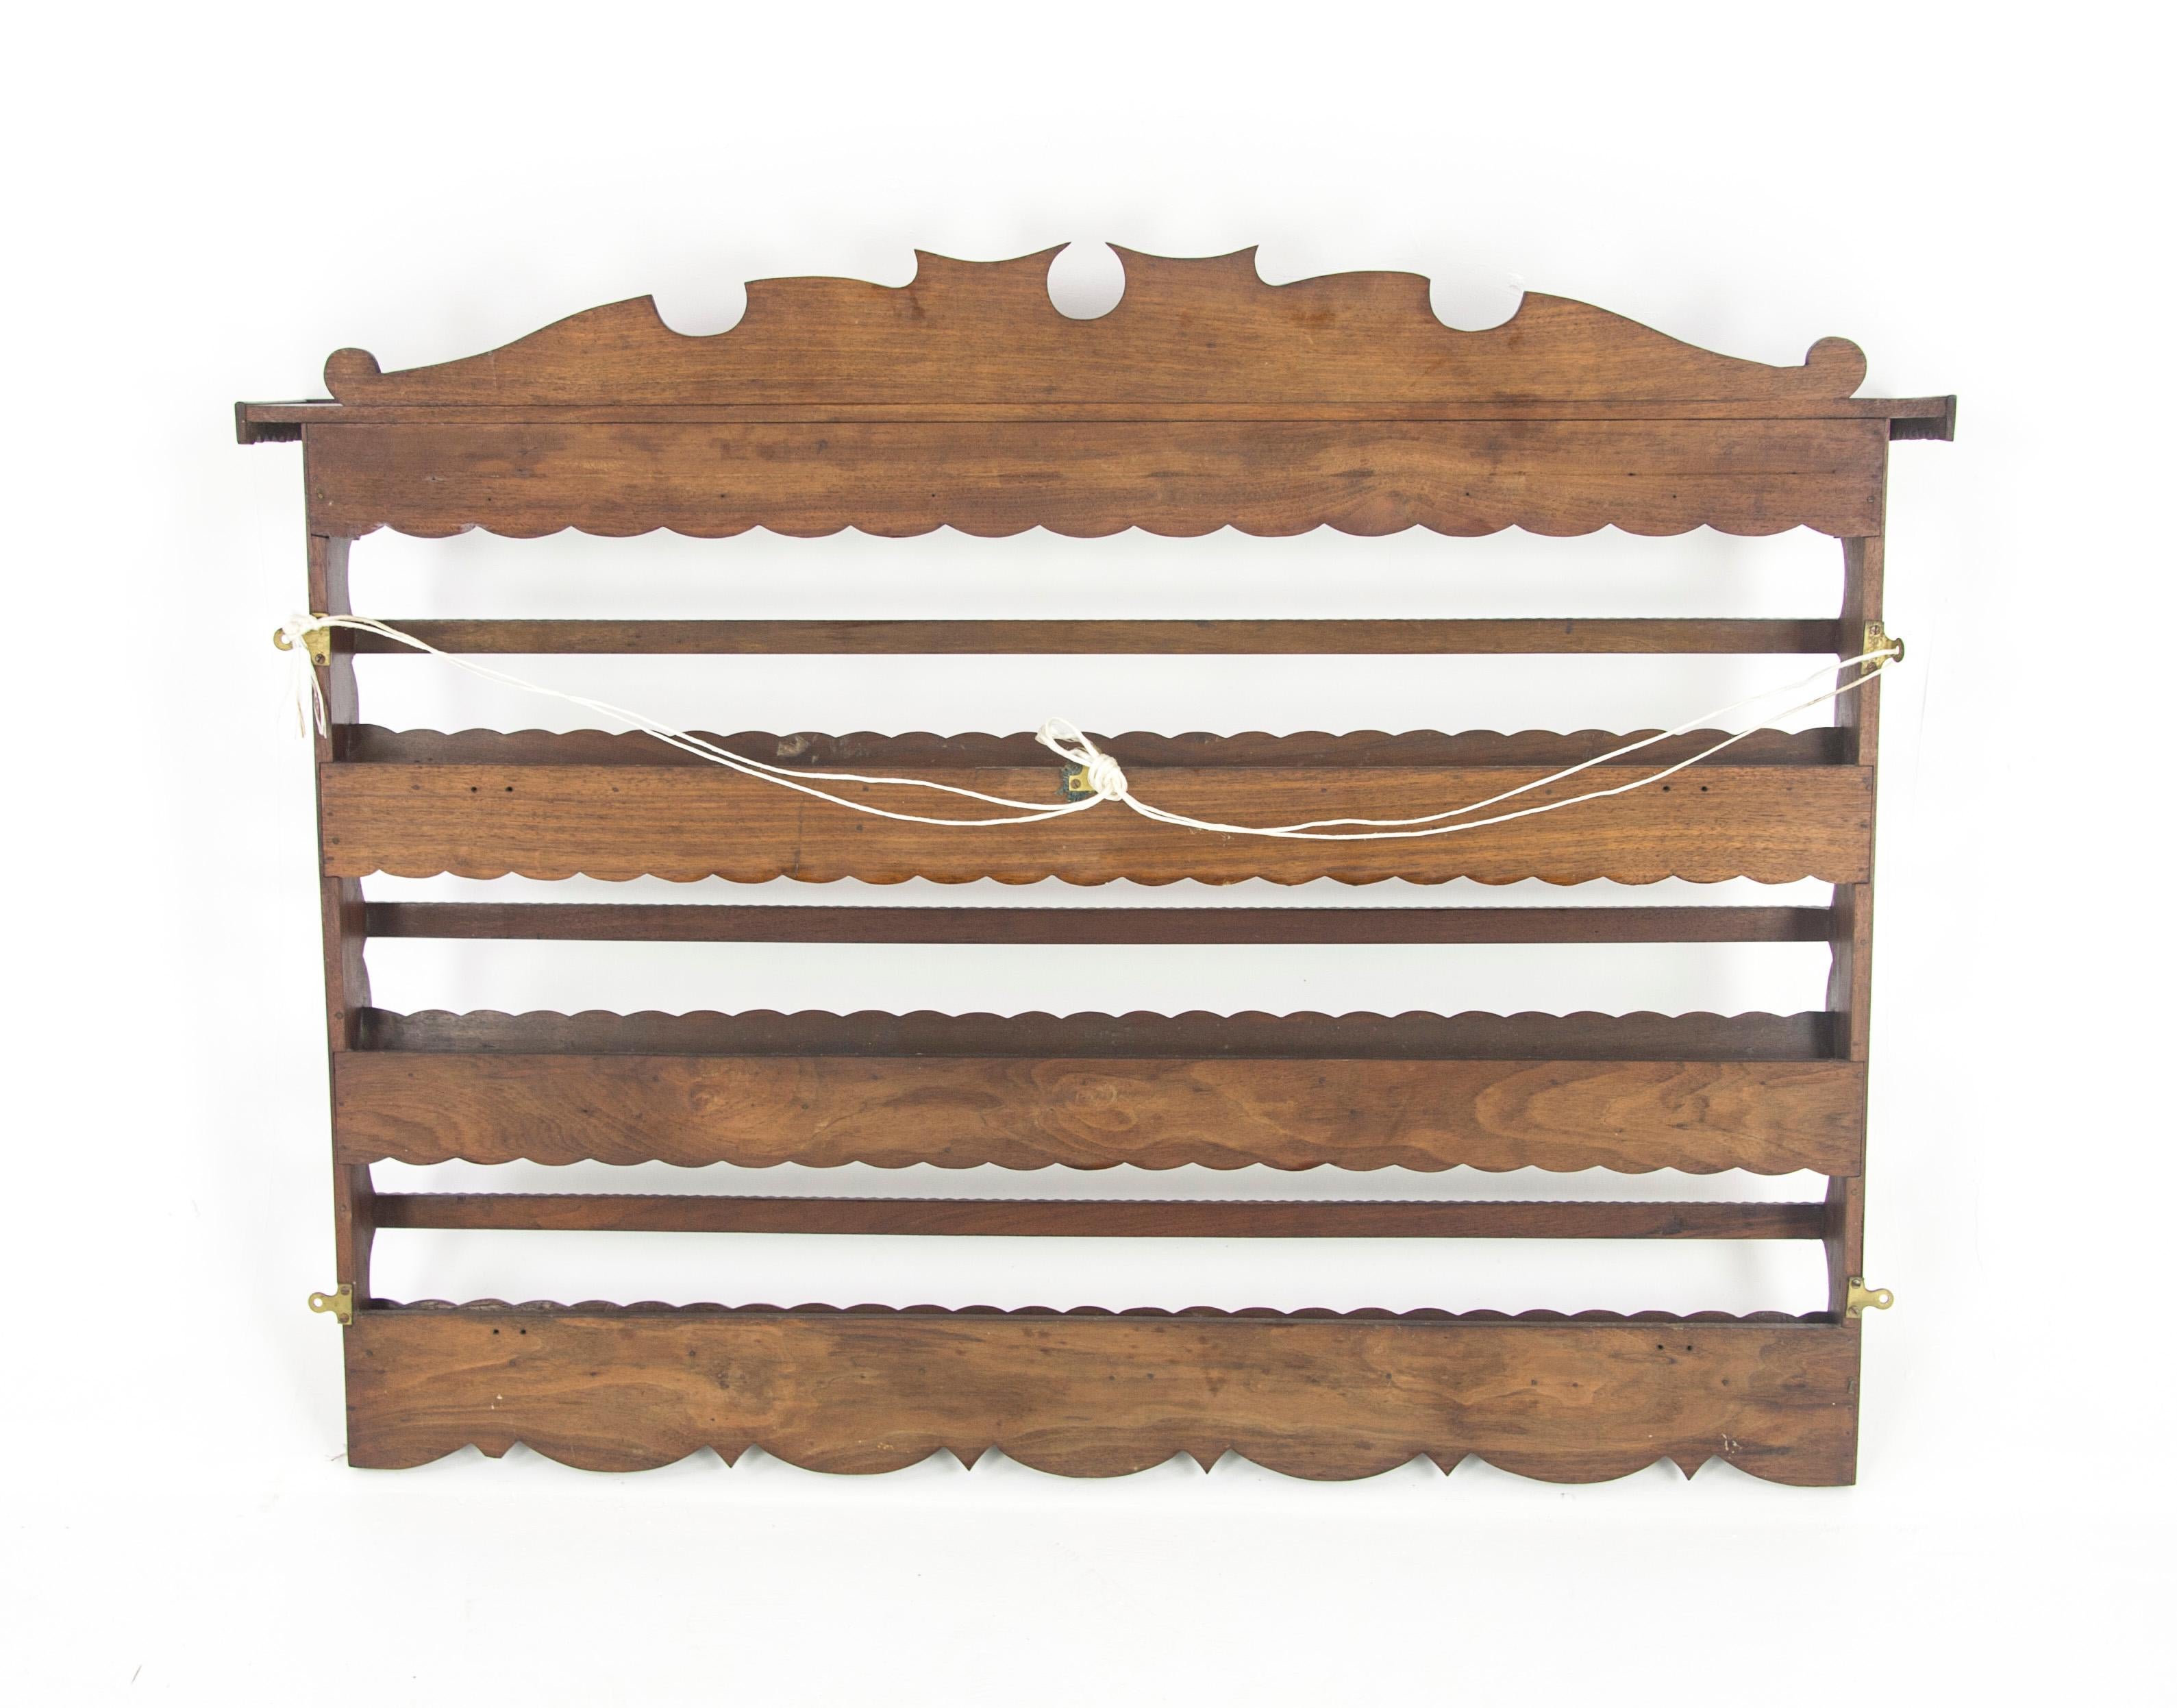 Late 19th Century Antique Plate Rack, Solid Walnut, Victorian, Chip Carved, Hanging Shelf REDUCED!